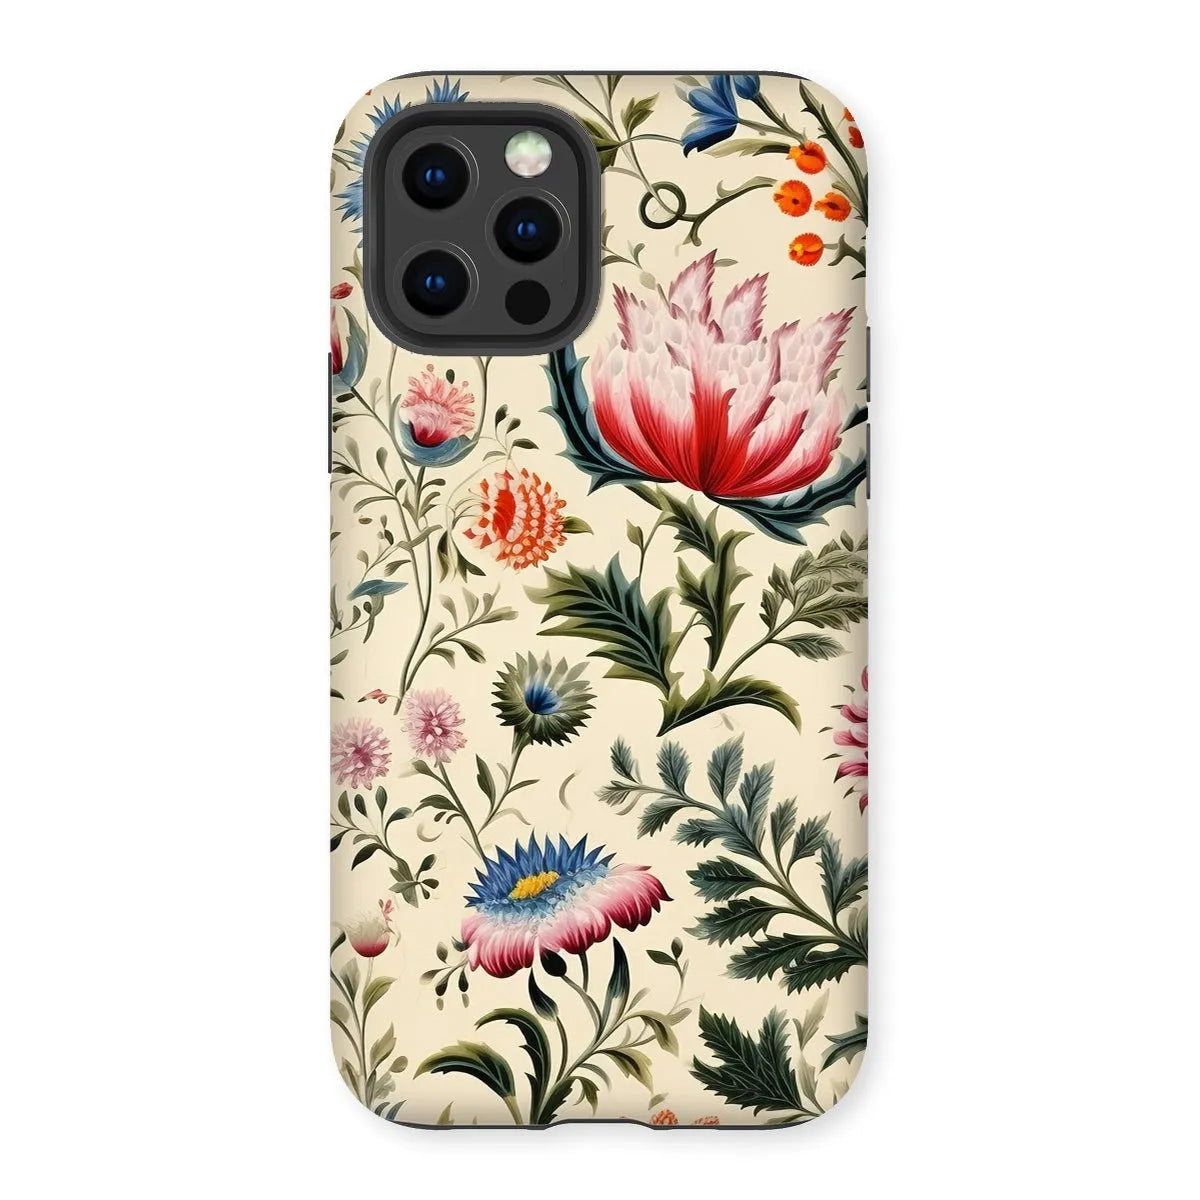 Wildflower Hoopla - Floral Garden Aesthetic Phone Case - Iphone 12 Pro / Matte - Mobile Phone Cases - Aesthetic Art